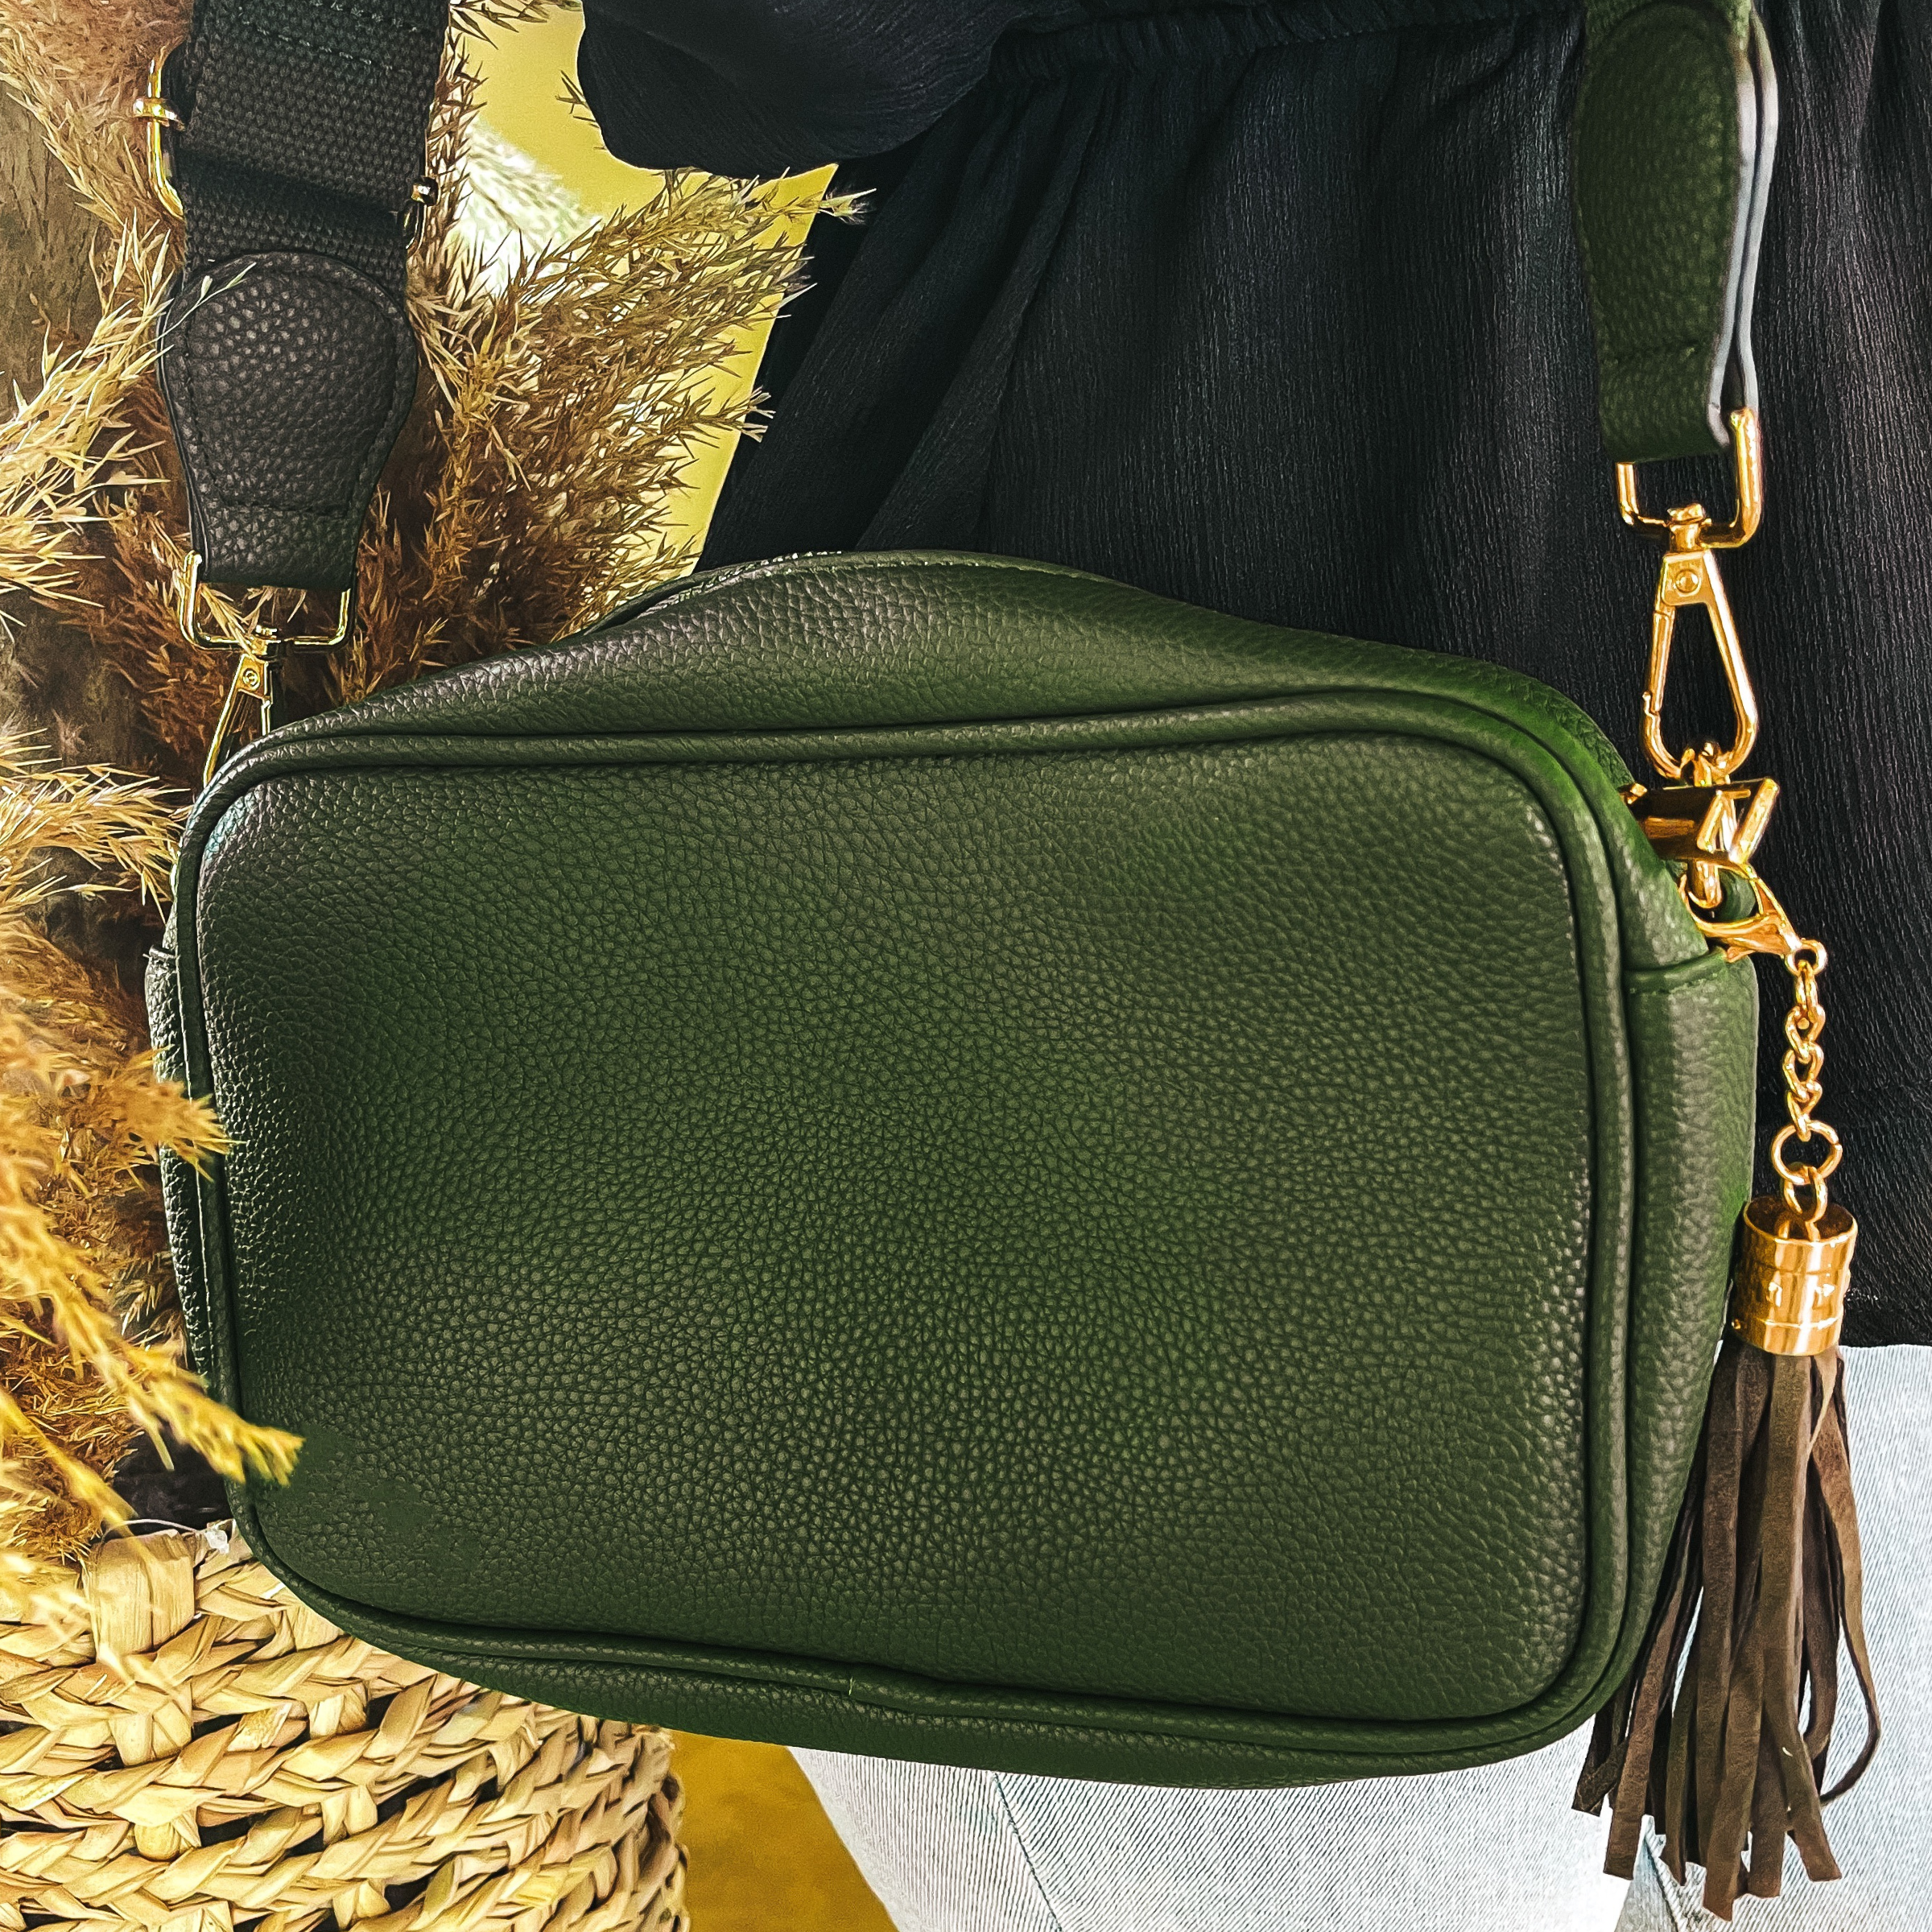 Lovin' Life Small Rectangle Crossbody Purse in Olive Green - Giddy Up Glamour Boutique